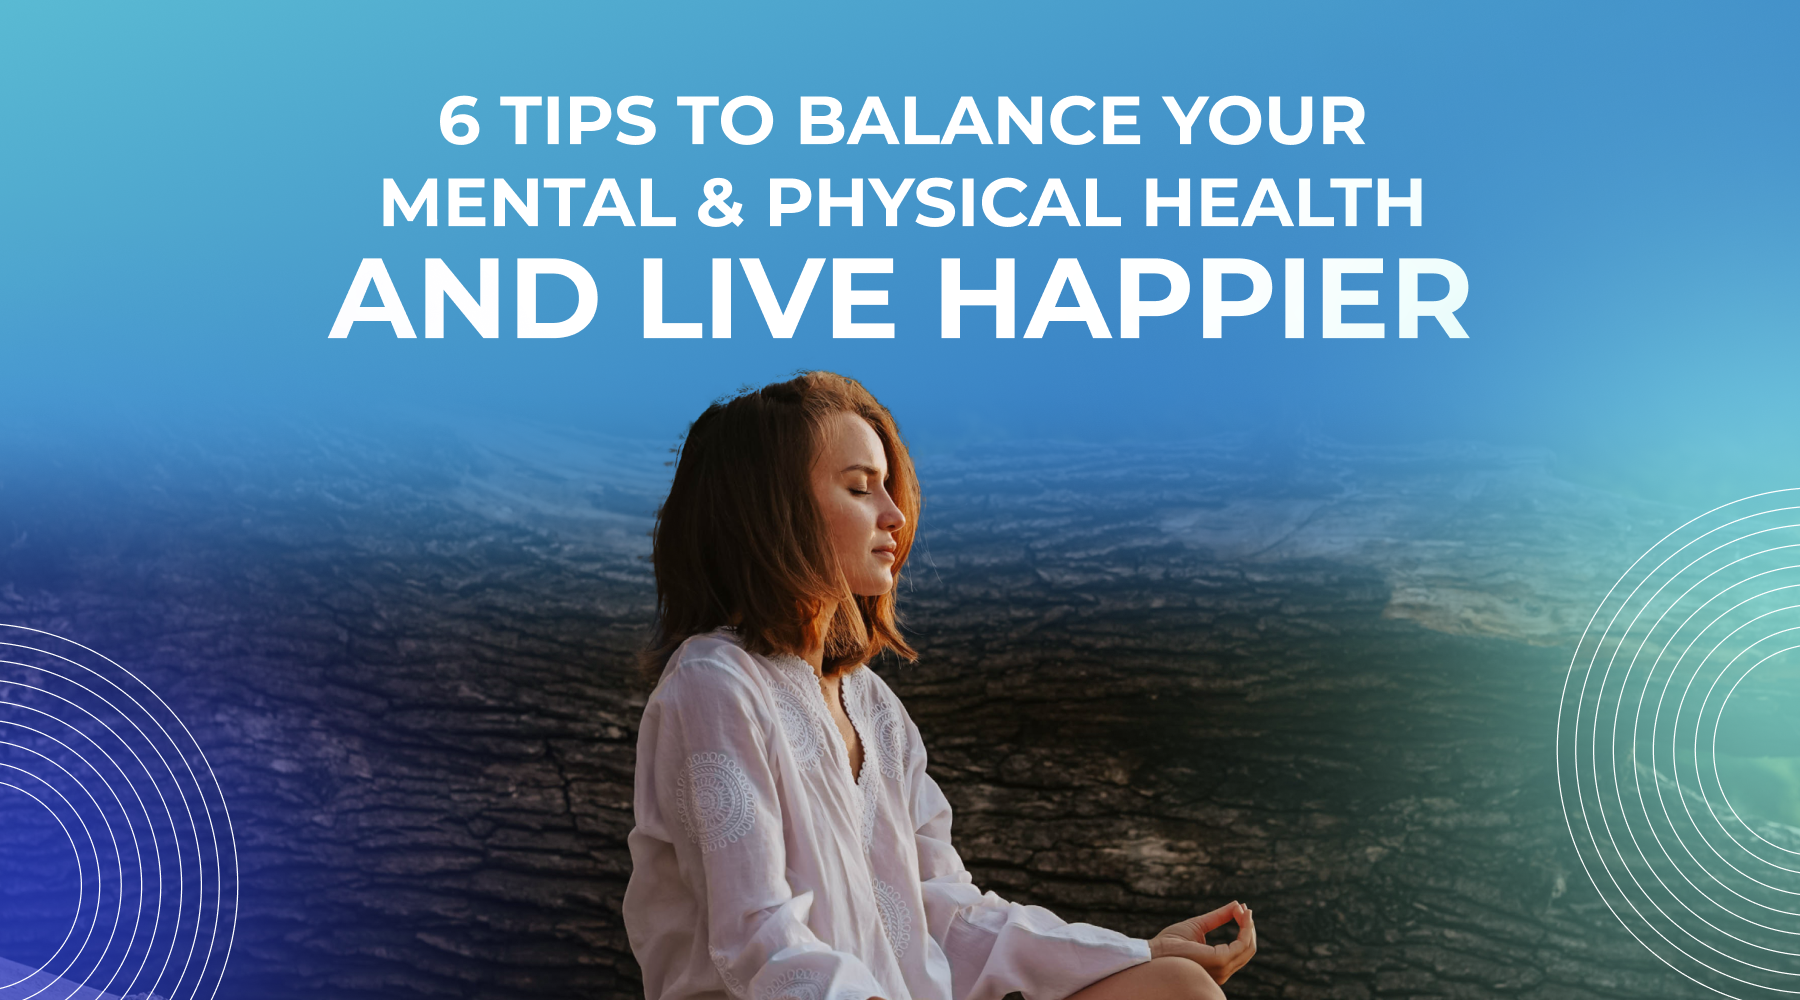 6 Tips To Balance Your Mental & Physical Health For A Happy Life